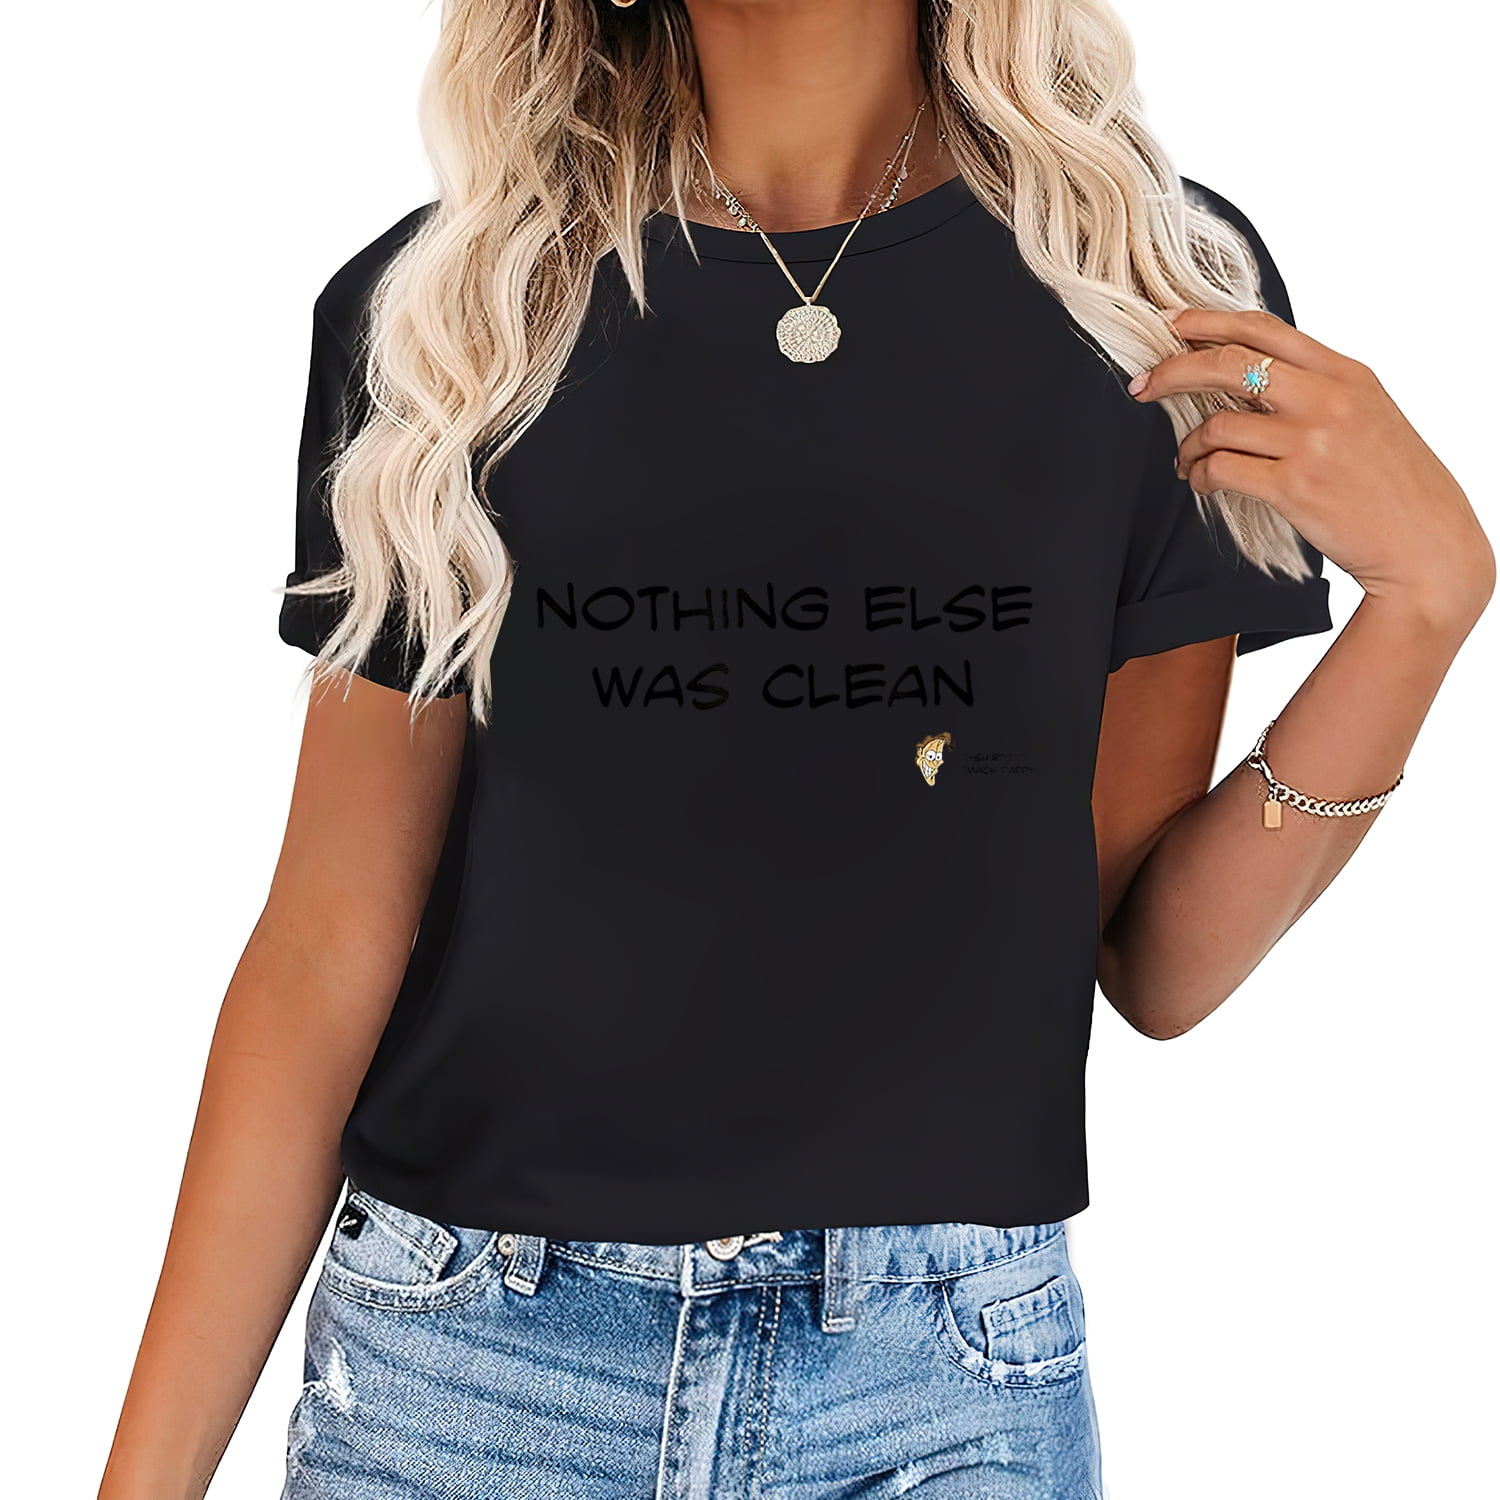 Nothing Else was Clean Shirt Women's Graphic Tee Shirt - Fashionable ...